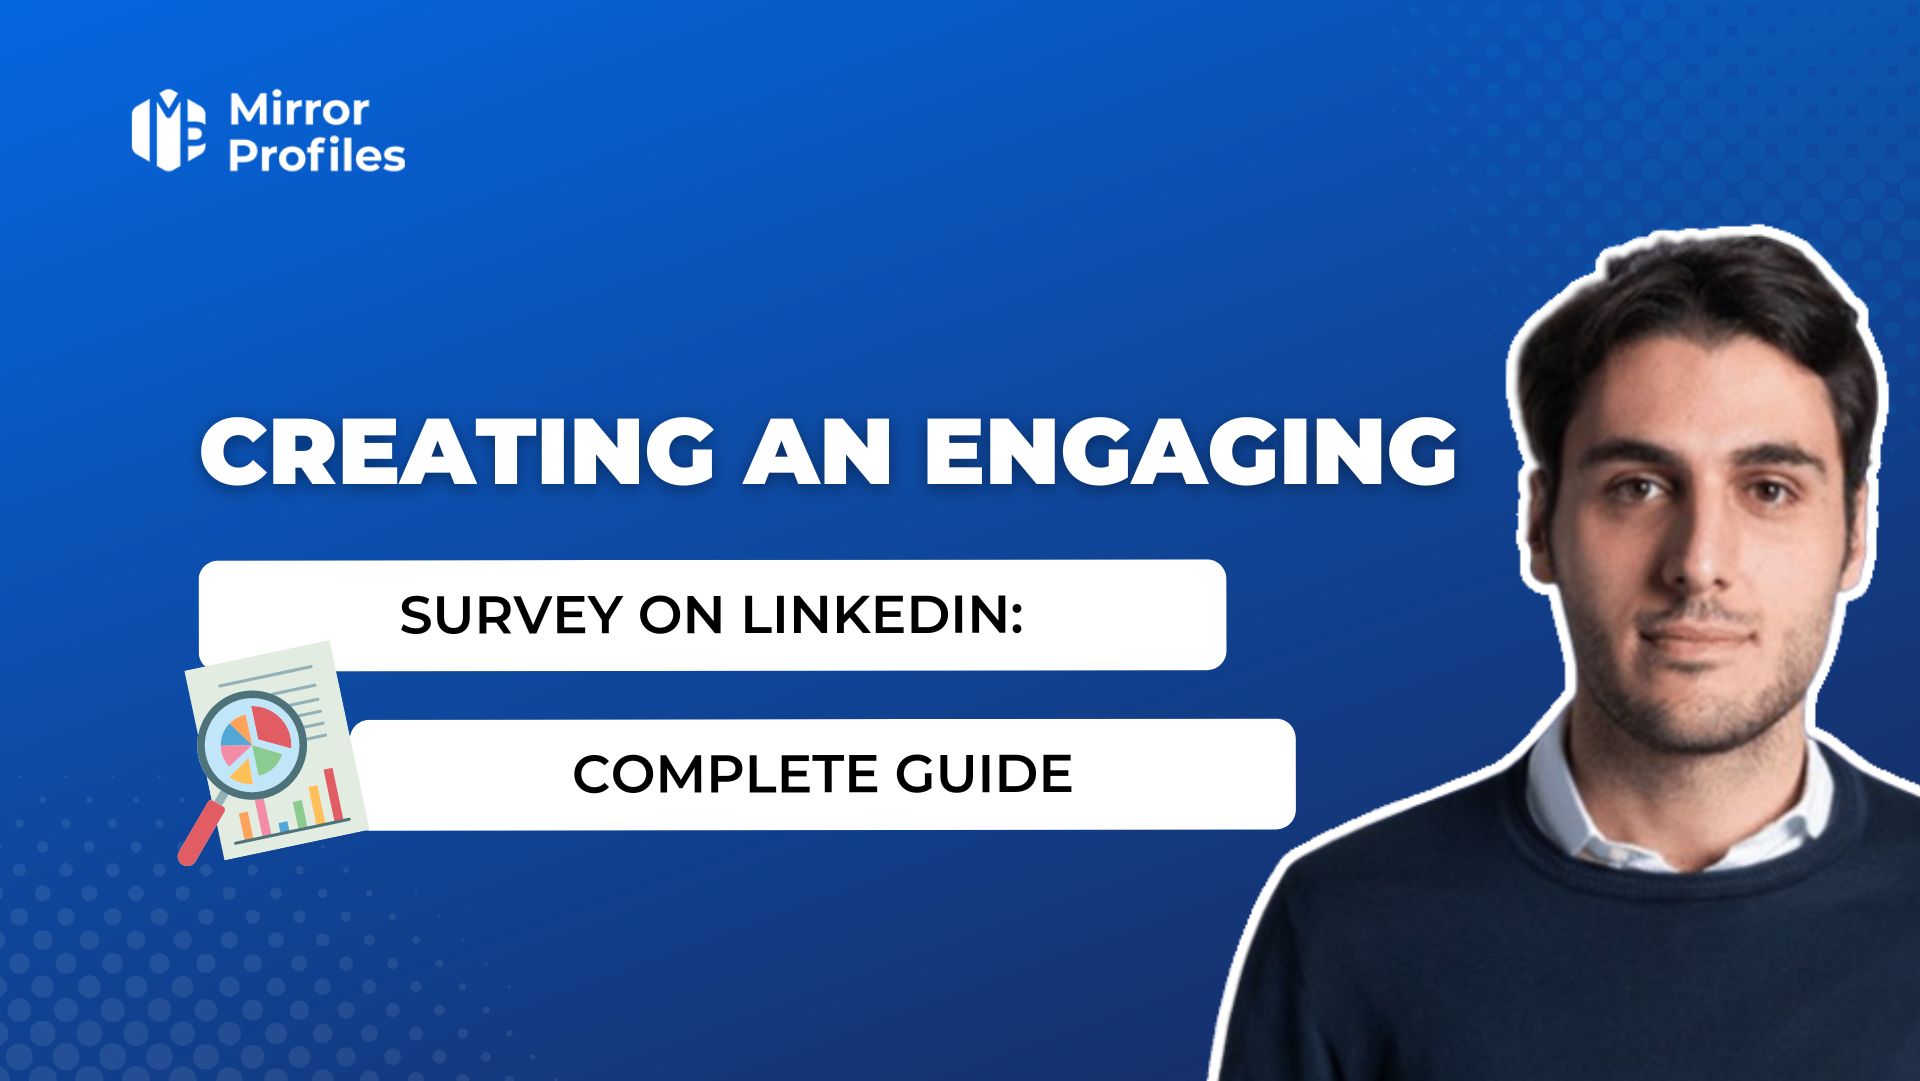 Creating an engaging survey on LinkedIn: complete guide